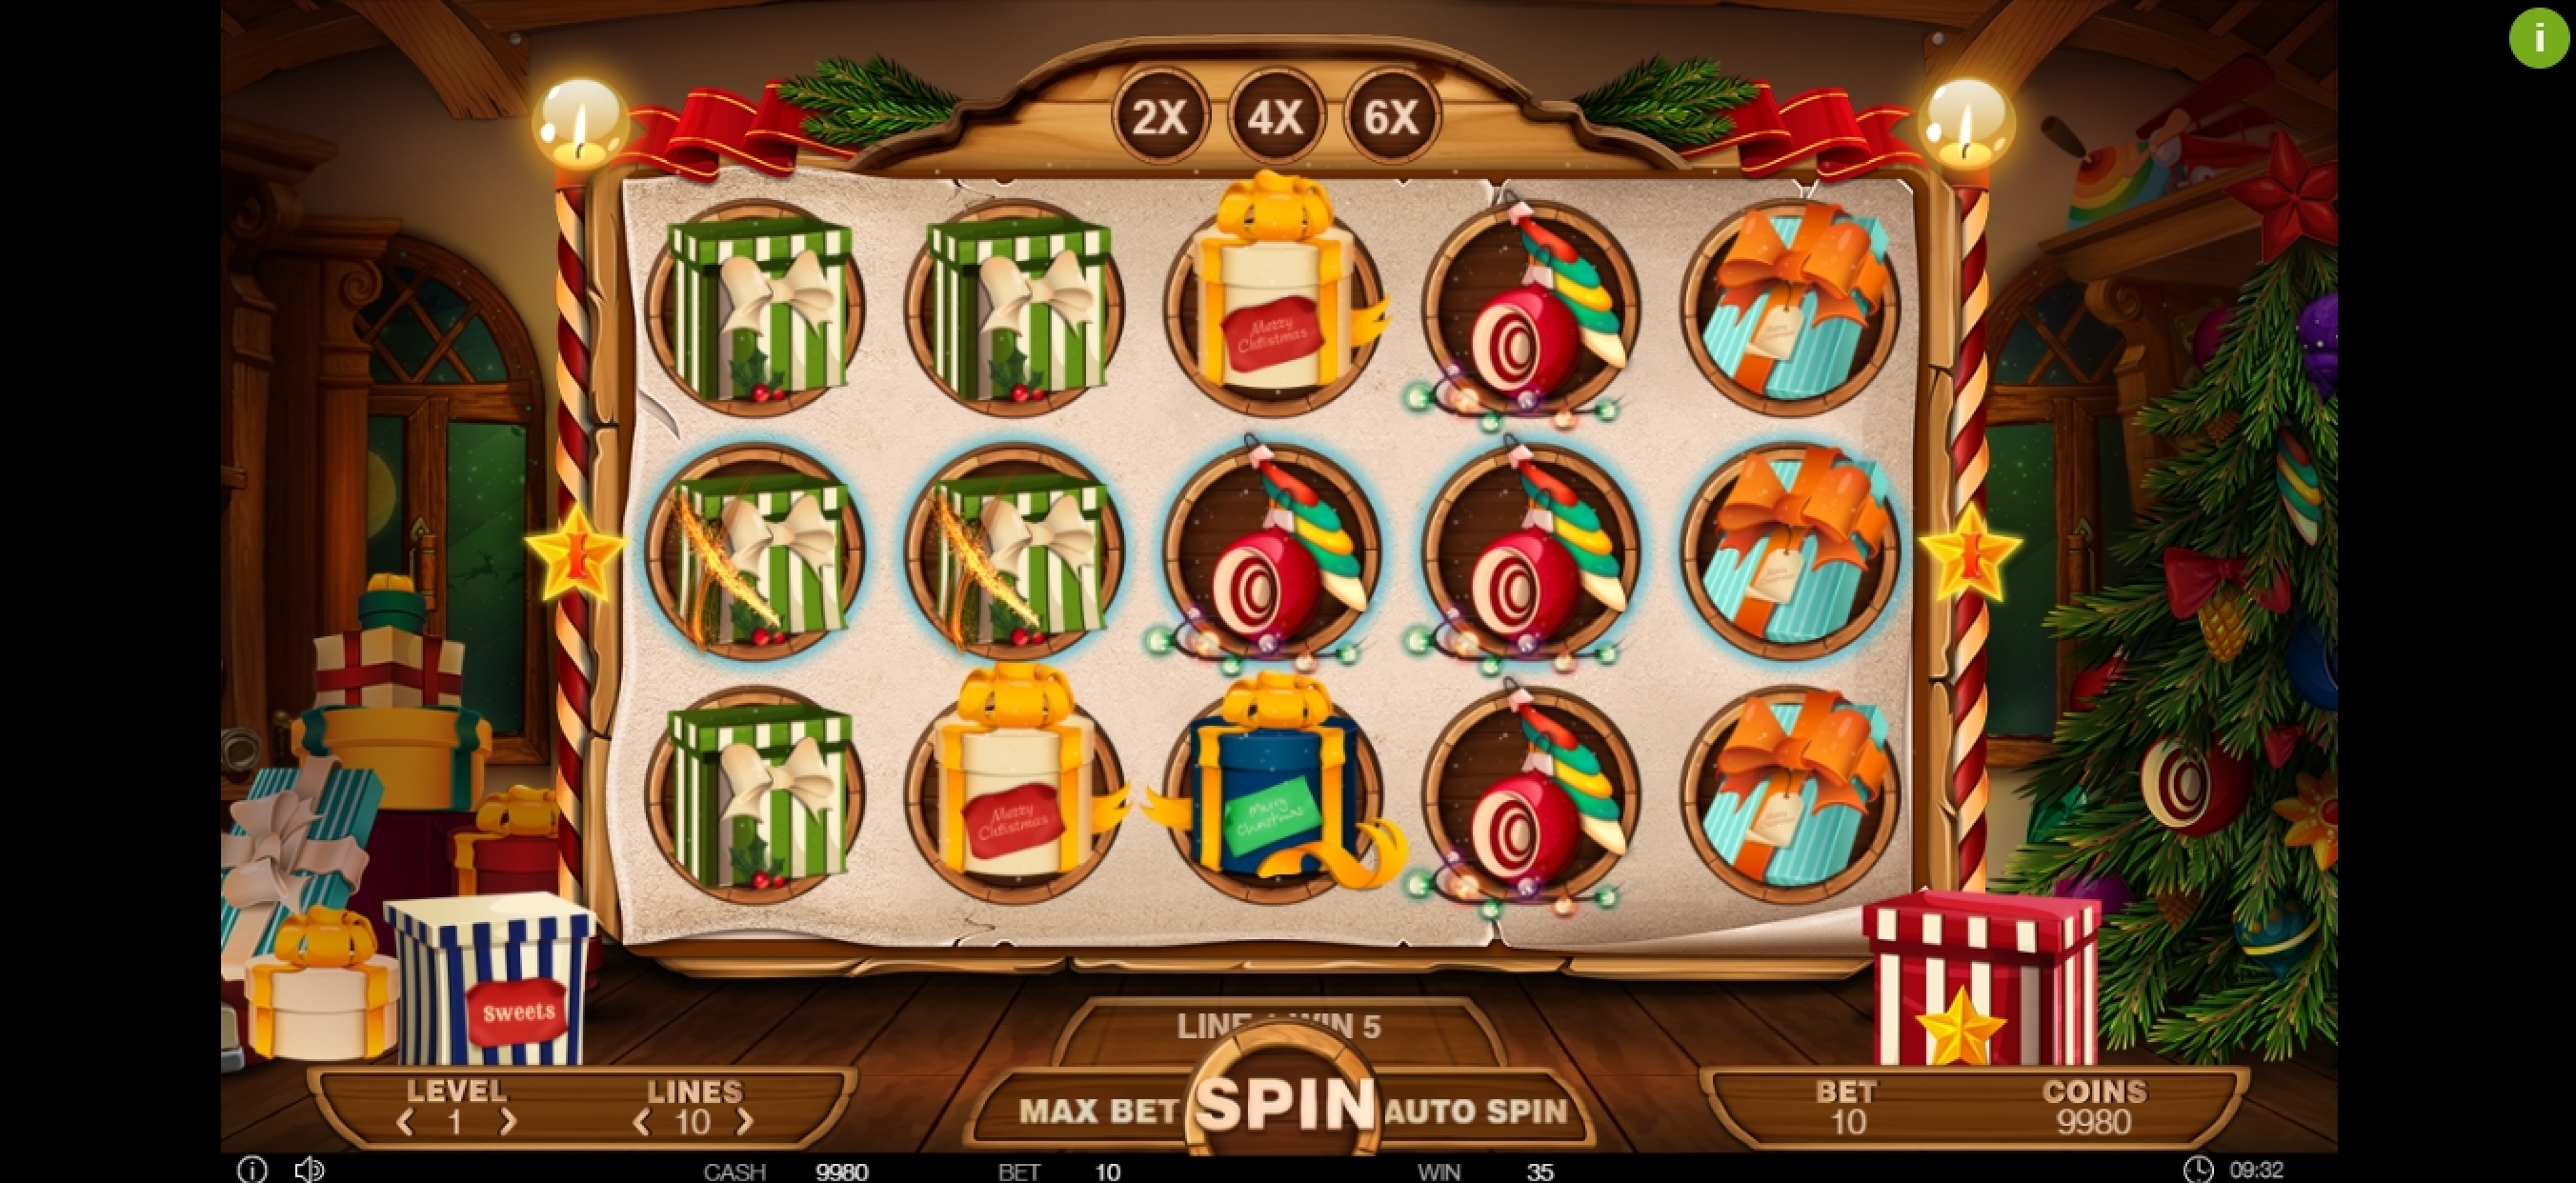 Win Money in Xmas Chance Free Slot Game by Betconstruct